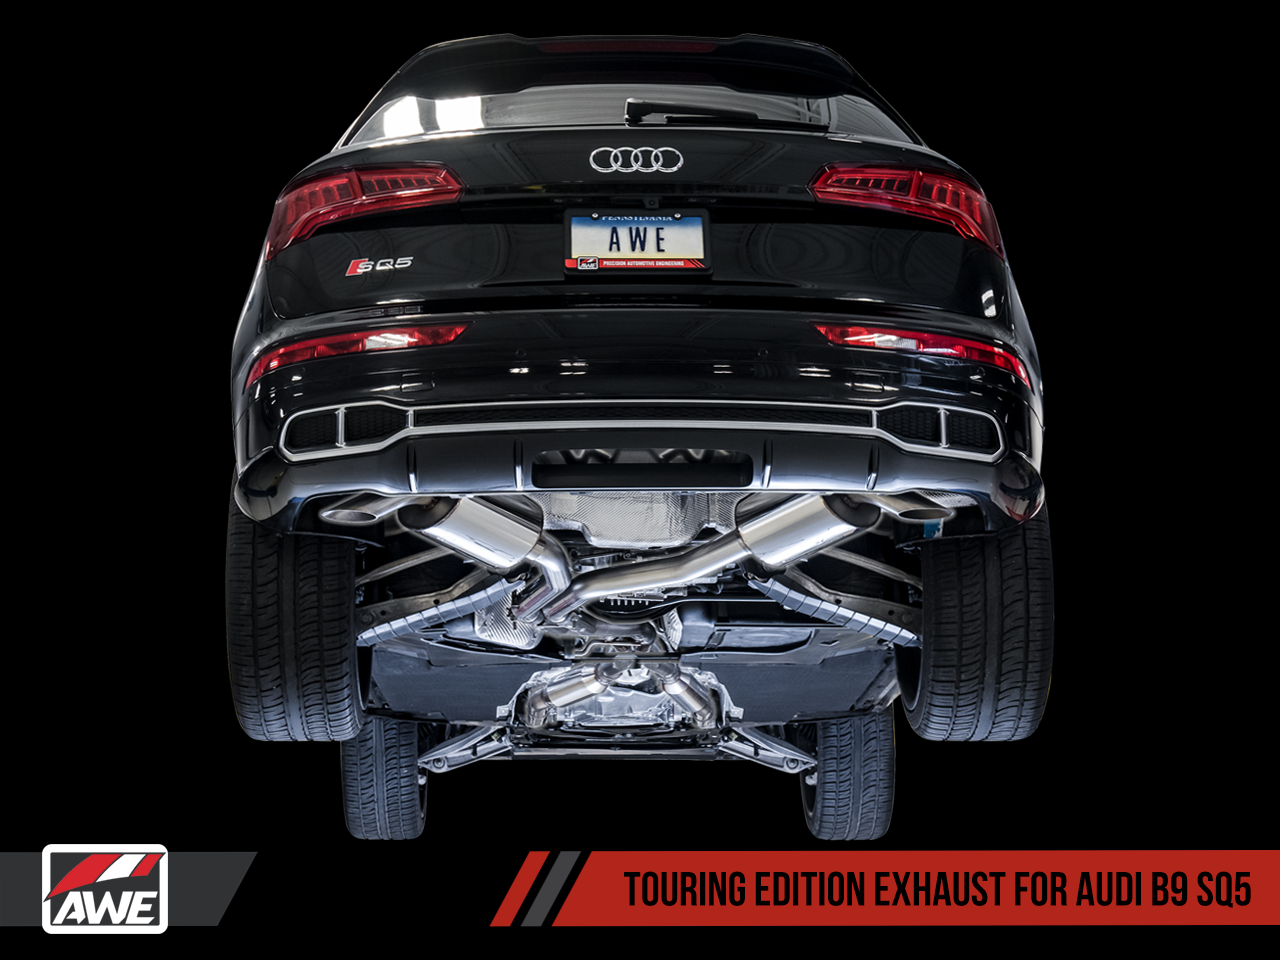 AWE Touring Edition Exhaust for Audi B9 SQ5 - Resonated - No Tips (Turn Downs) - Motorsports LA